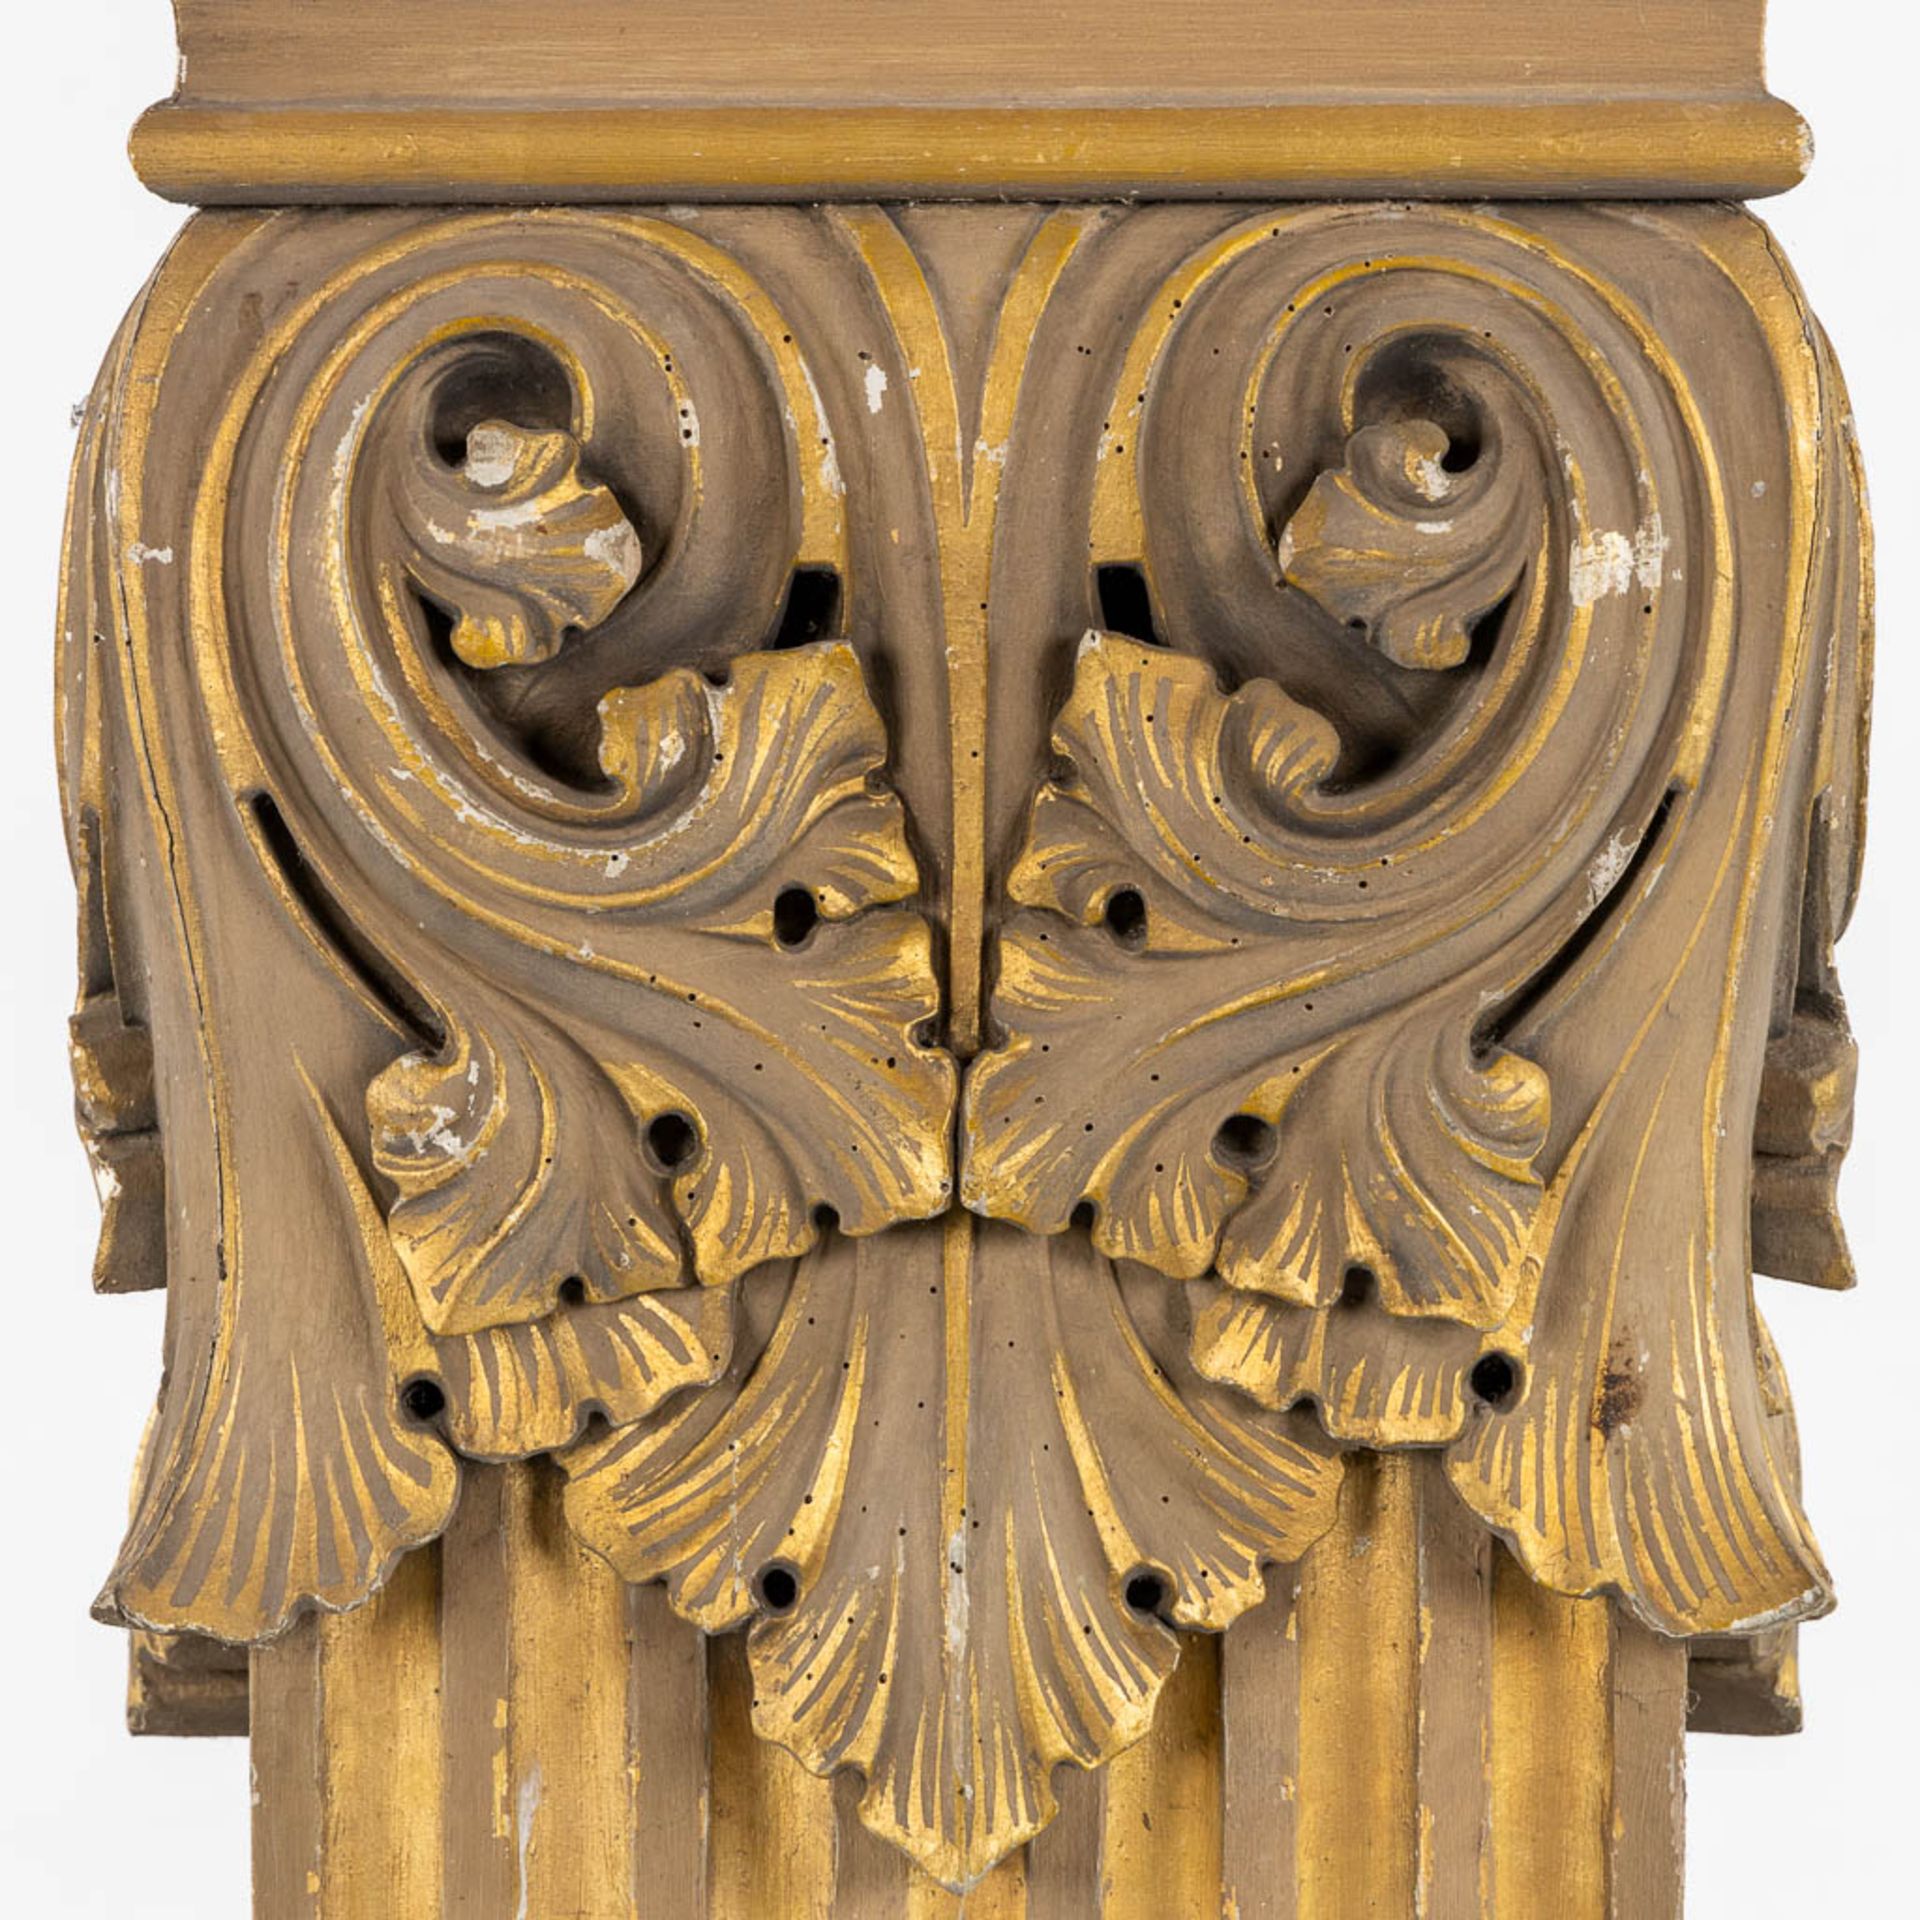 A richly gilt and woodsculptured pedestal with an ionic capitel. Circa 1900. (L:44 x W:60 x H:130 cm - Image 8 of 14